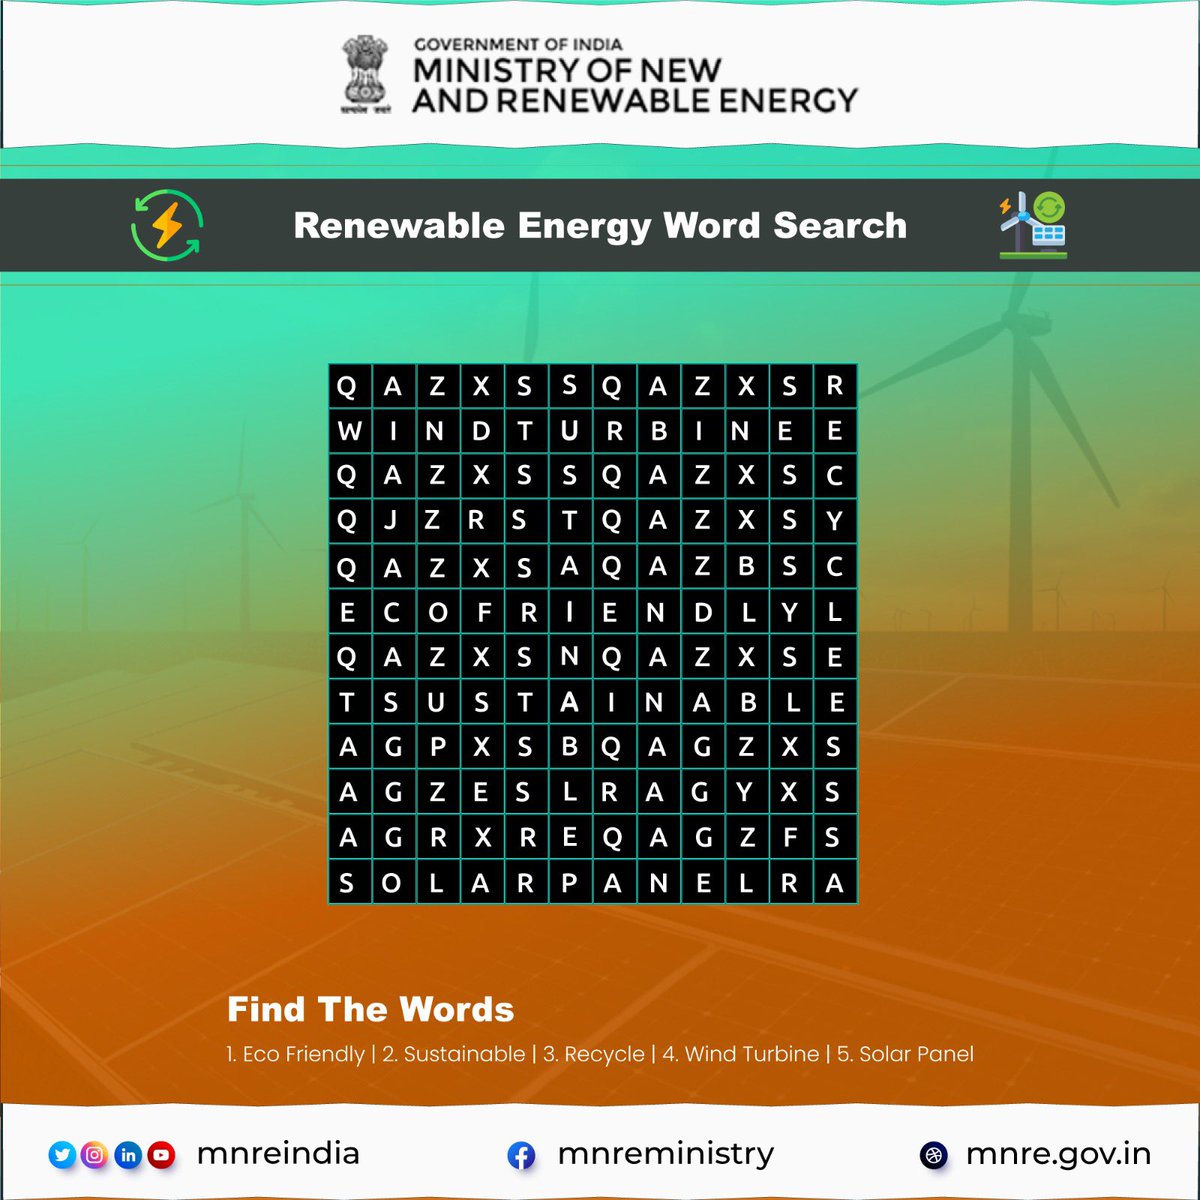 Crossword challenge! Ready to crack the code?

Let's unlock the power of Renewable Energy and pave the way to a brighter future.

#RenewableEnergy #PuzzleFun #MNREIndia